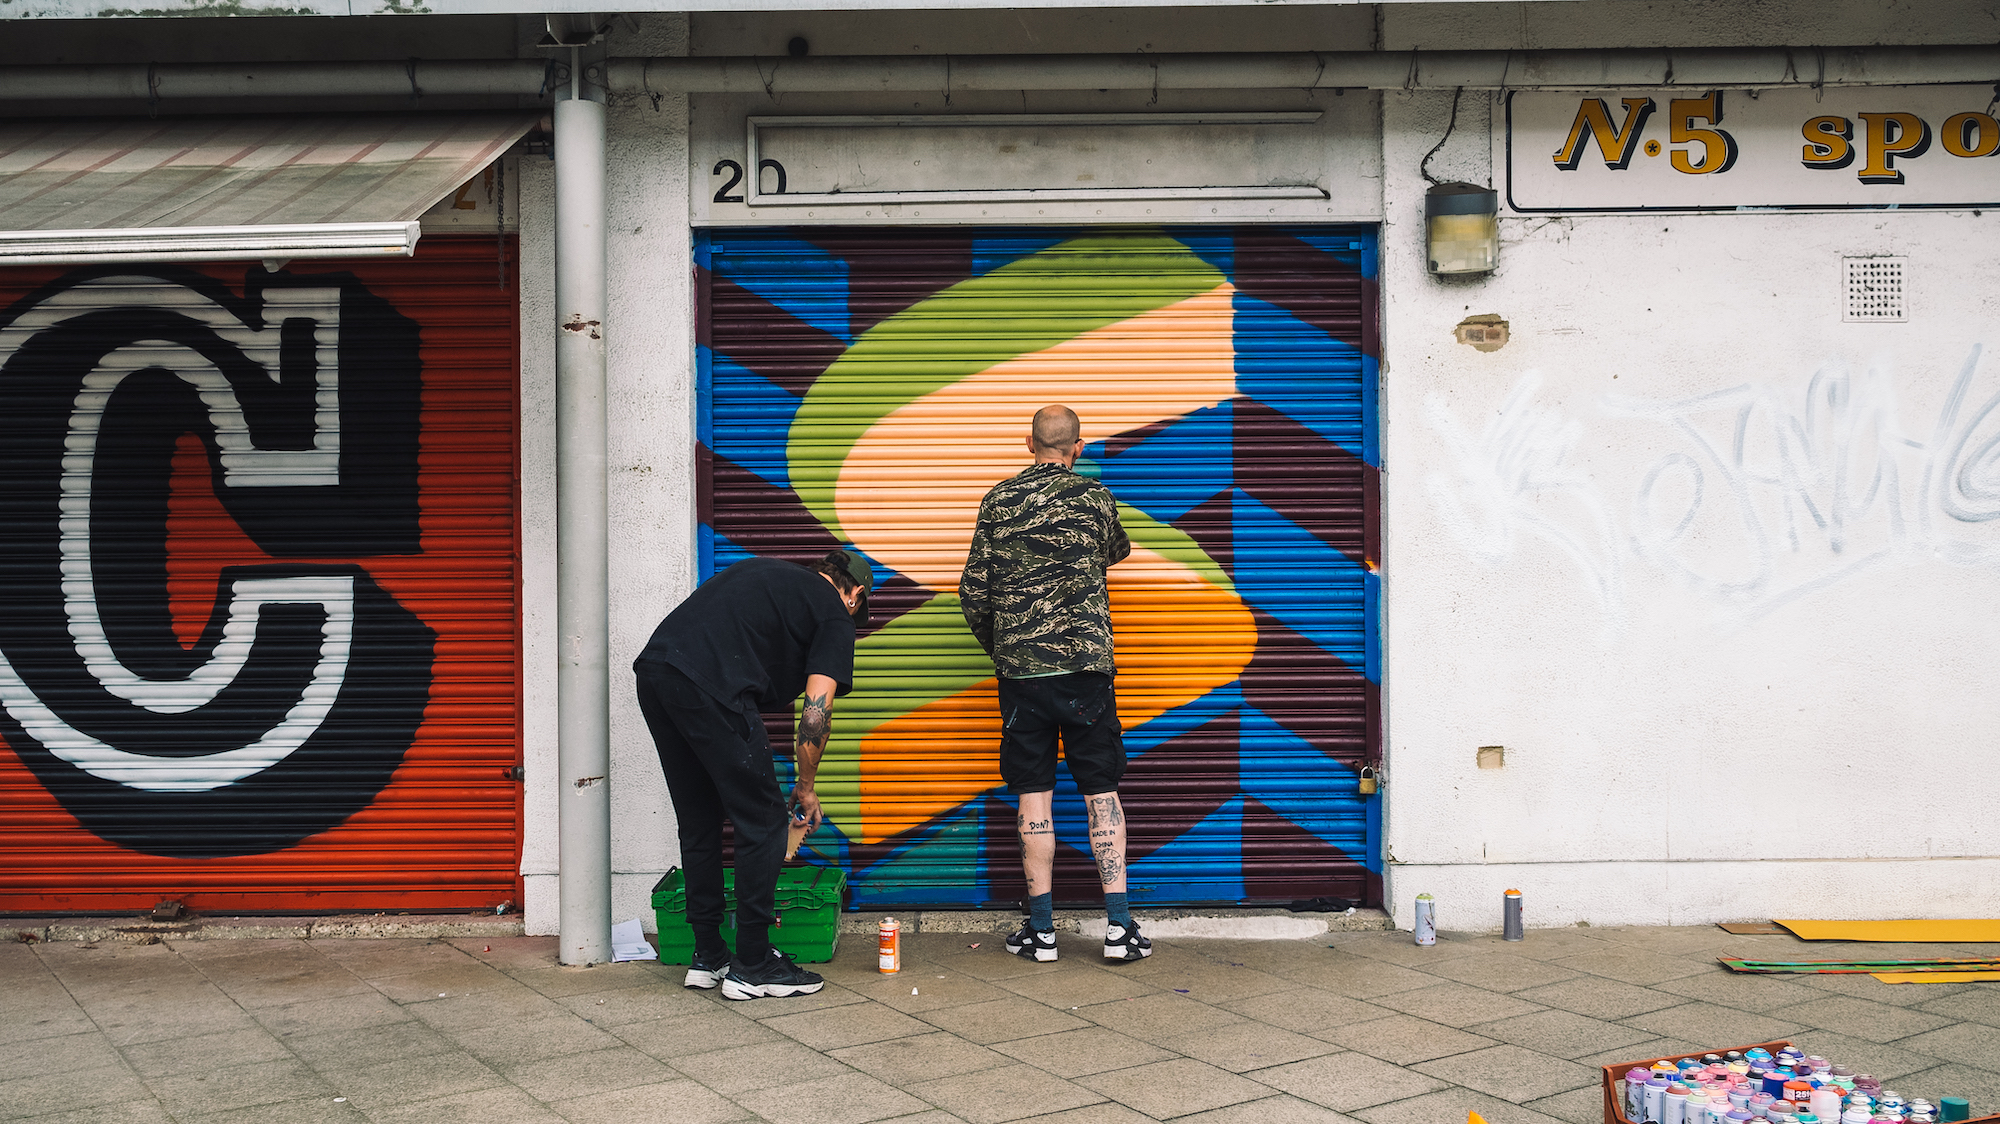 The Full English Alphabet Painted on Store Shutters in 26 Different Fonts by Ben Eine